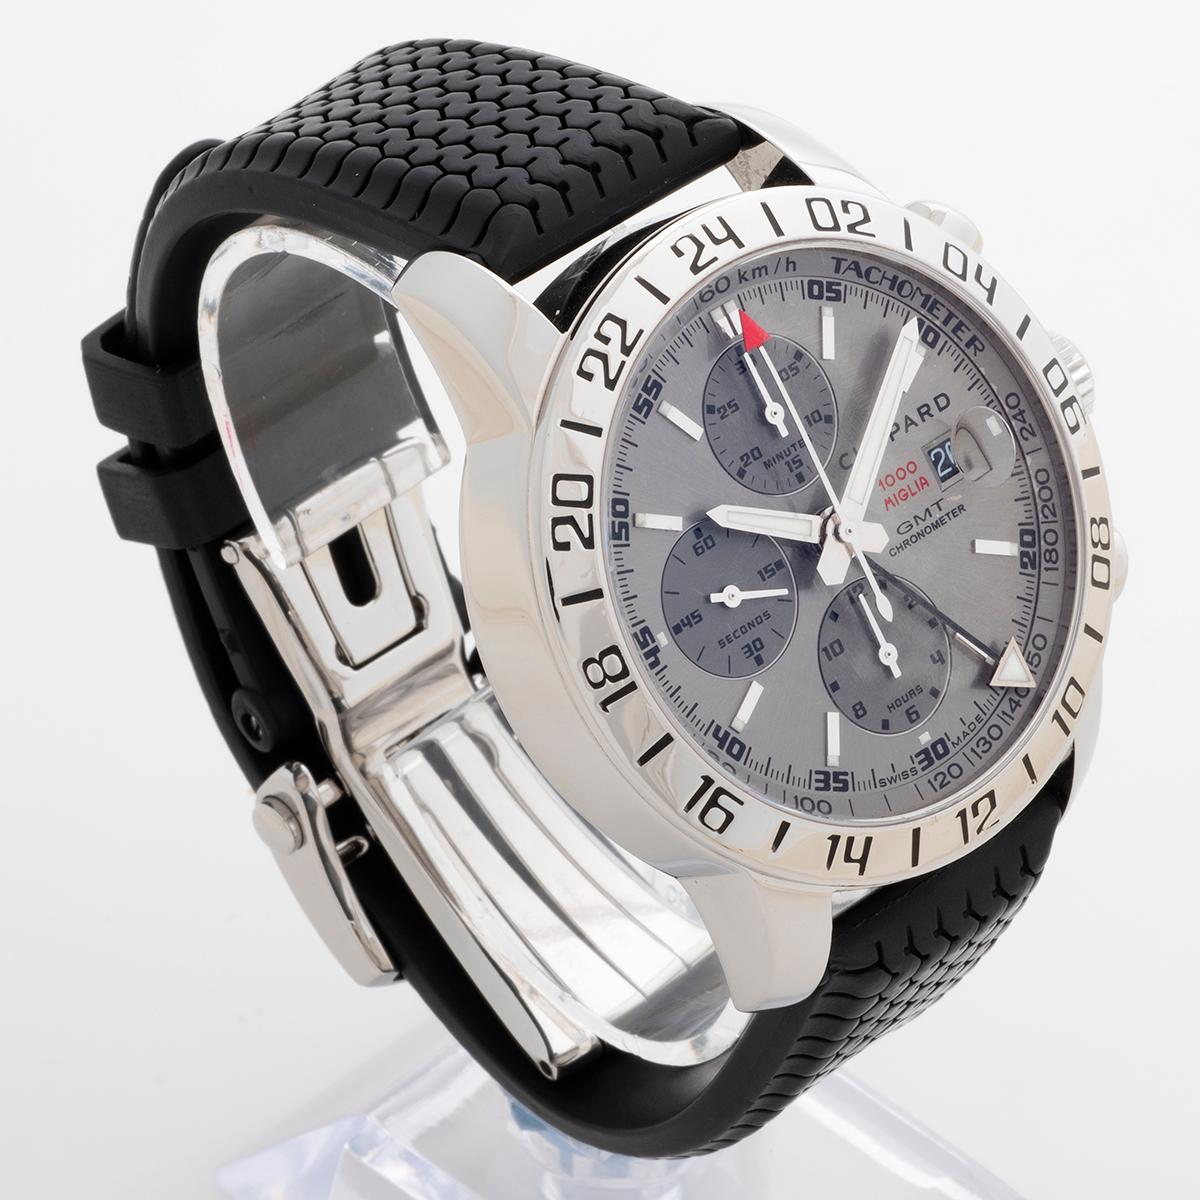 Our rare Chopard Mille Miglia Chronograph GMT features a 42mm stainless steel case with rare and very attractive rhodium grey dial and exhibition case back. Reference 168992 features both chronograph and date as well as GMT function, making this an